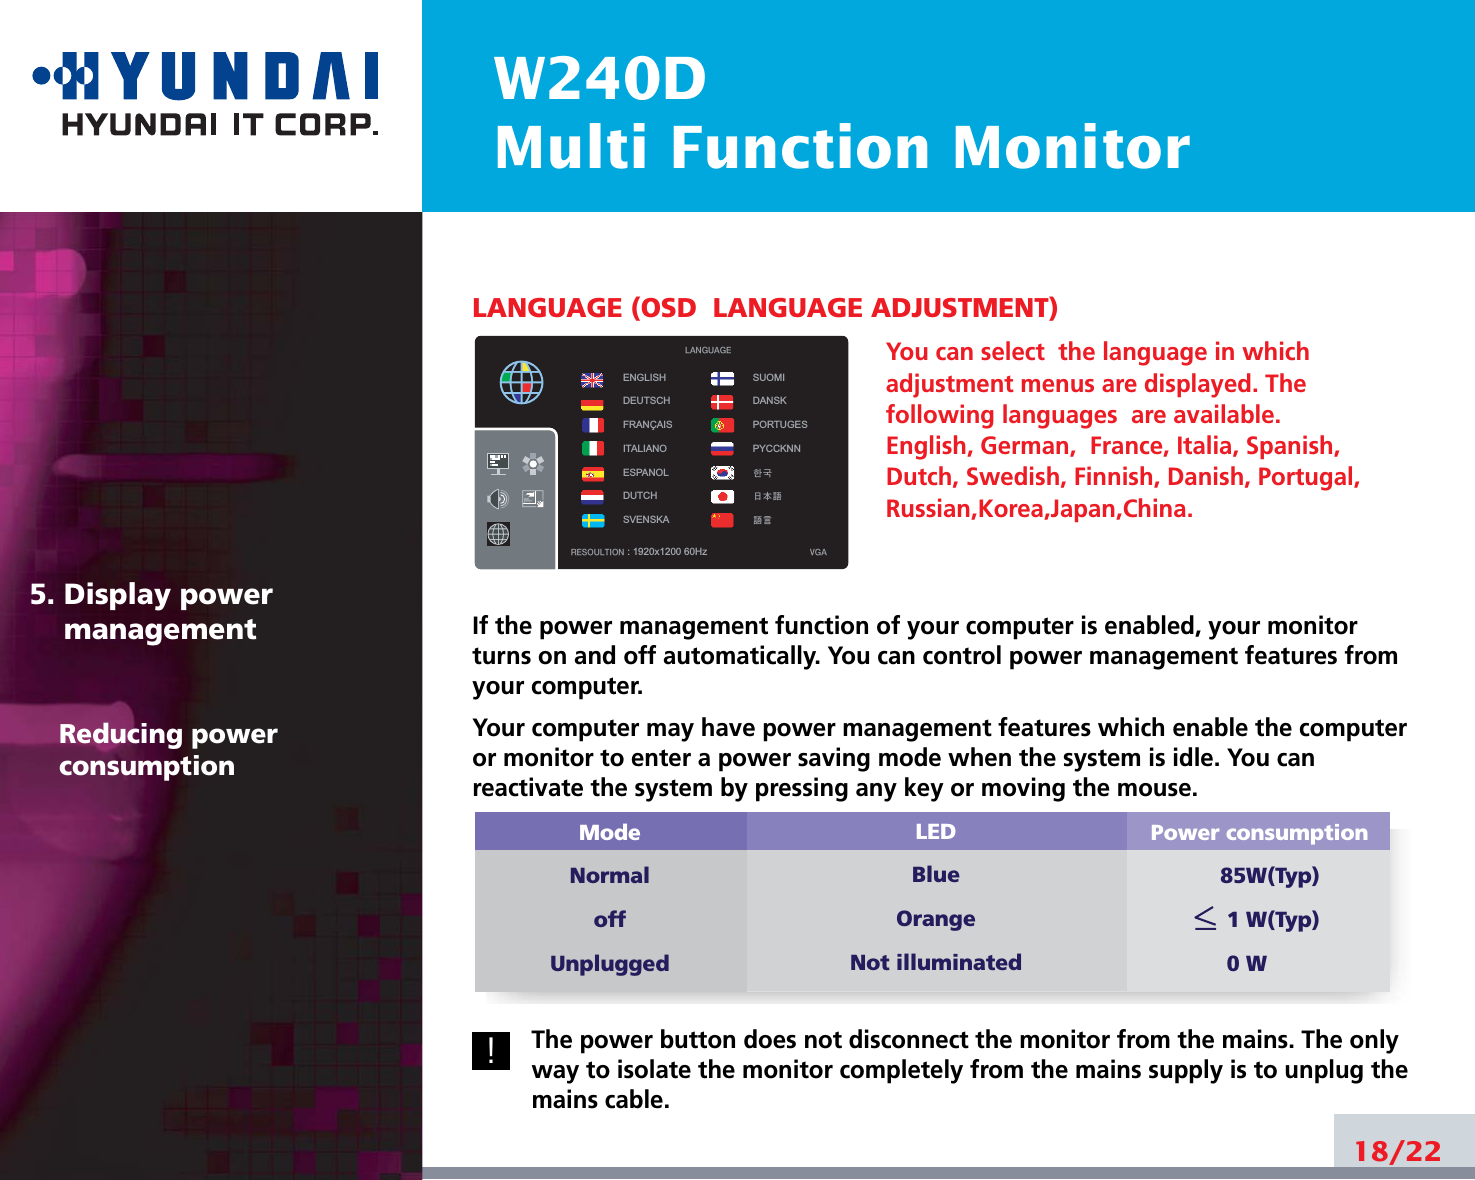 W240DMulti Function MonitorLANGUAGE (OSD  LANGUAGE ADJUSTMENT)You can select  the language in whichadjustment menus are displayed. Thefollowing languages  are available.English, German,  France, Italia, Spanish,Dutch, Swedish, Finnish, Danish, Portugal,Russian,Korea,Japan,China.If the power management function of your computer is enabled, your monitorturns on and off automatically. You can control power management features fromyour computer.Your computer may have power management features which enable the computeror monitor to enter a power saving mode when the system is idle. You canreactivate the system by pressing any key or moving the mouse.The power button does not disconnect the monitor from the mains. The onlyway to isolate the monitor completely from the mains supply is to unplug themains cable.18/225. Display power managementReducing powerconsumption!Power consumption85W(Typ)1 W(Typ)0 WModeNormaloffUnpluggedLEDBlueOrangeNot illuminatedENGLISHDEUTSCHFRANÇAISITALIANOESPANOLDUTCHSVENSKASUOMIDANSKPORTUGESPYCCKNN한국 日本語語言RESOULTION : 1920x1200 60Hz VGALANGUAGE